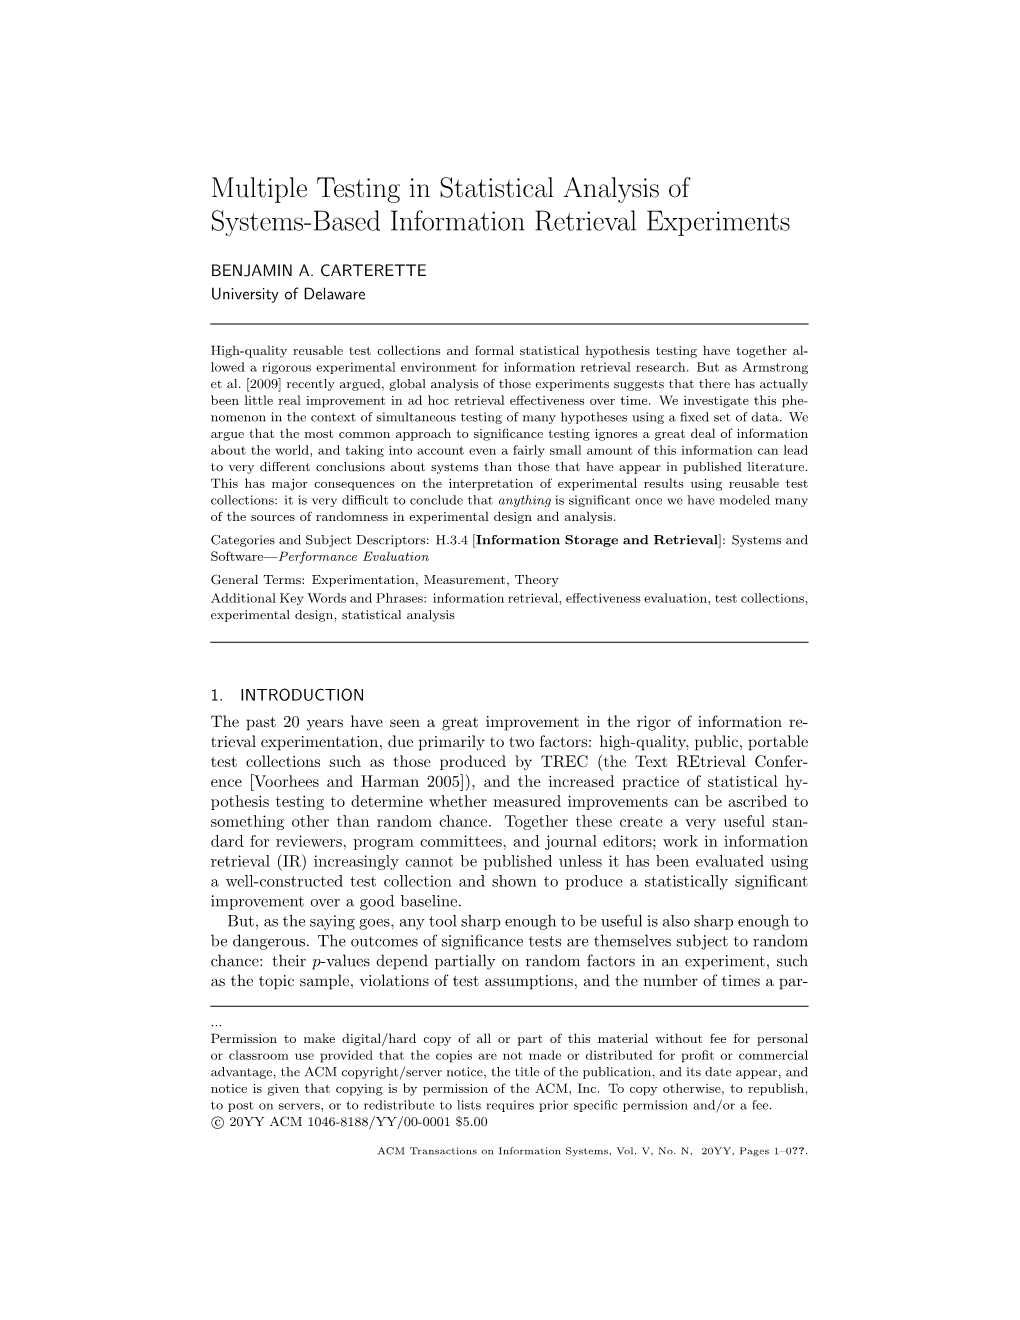 Multiple Testing in Statistical Analysis of Systems-Based Information Retrieval Experiments